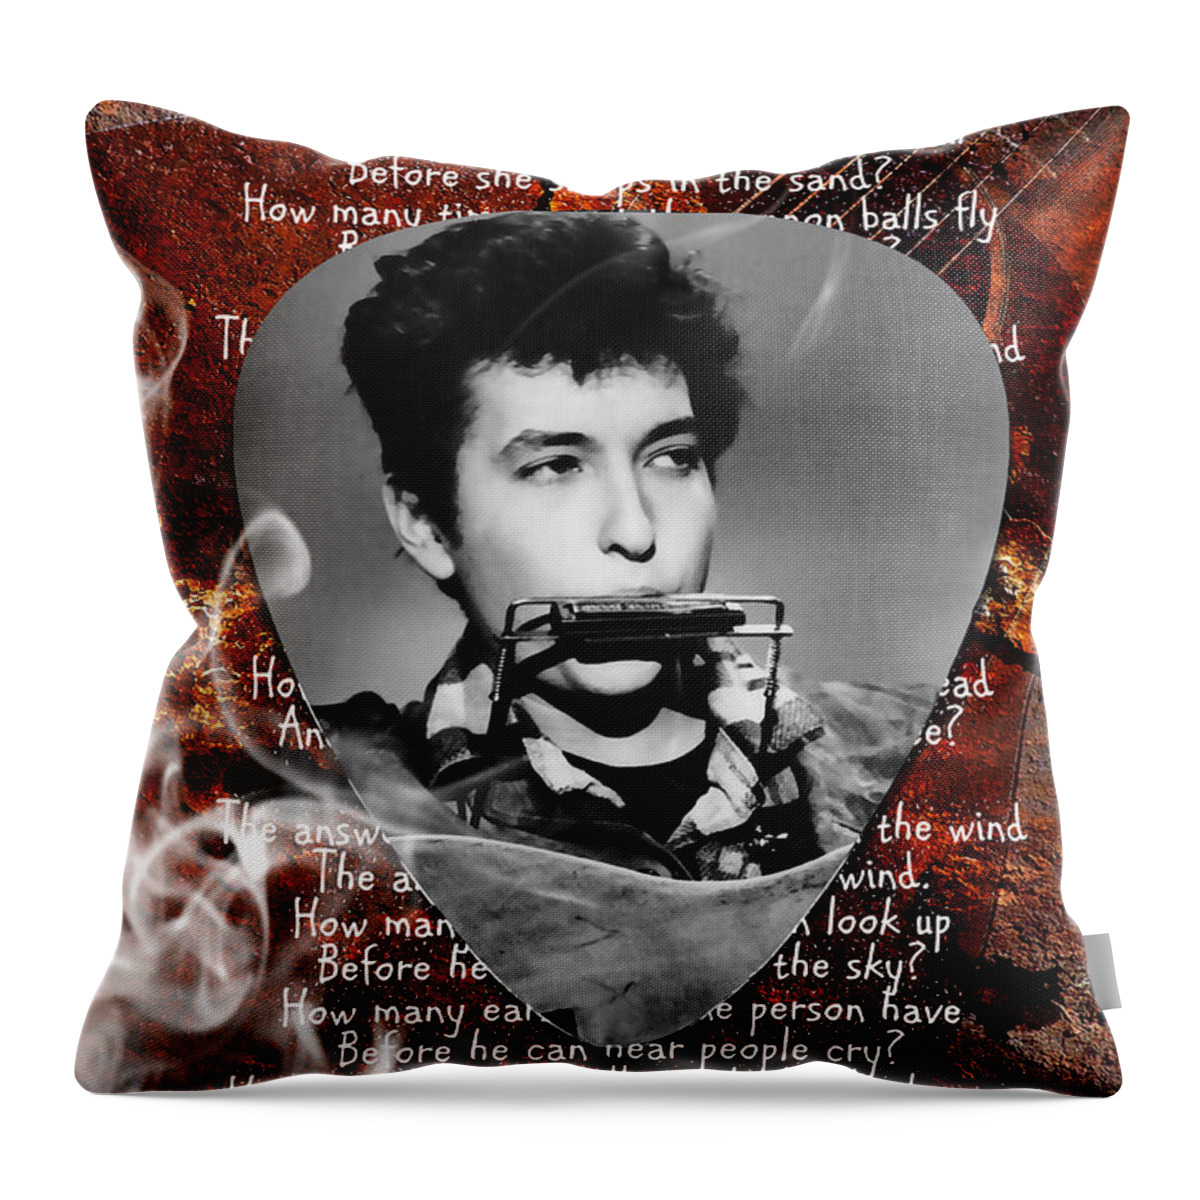 Bob Dylan Art Throw Pillow featuring the mixed media Bob Dylan Art by Marvin Blaine